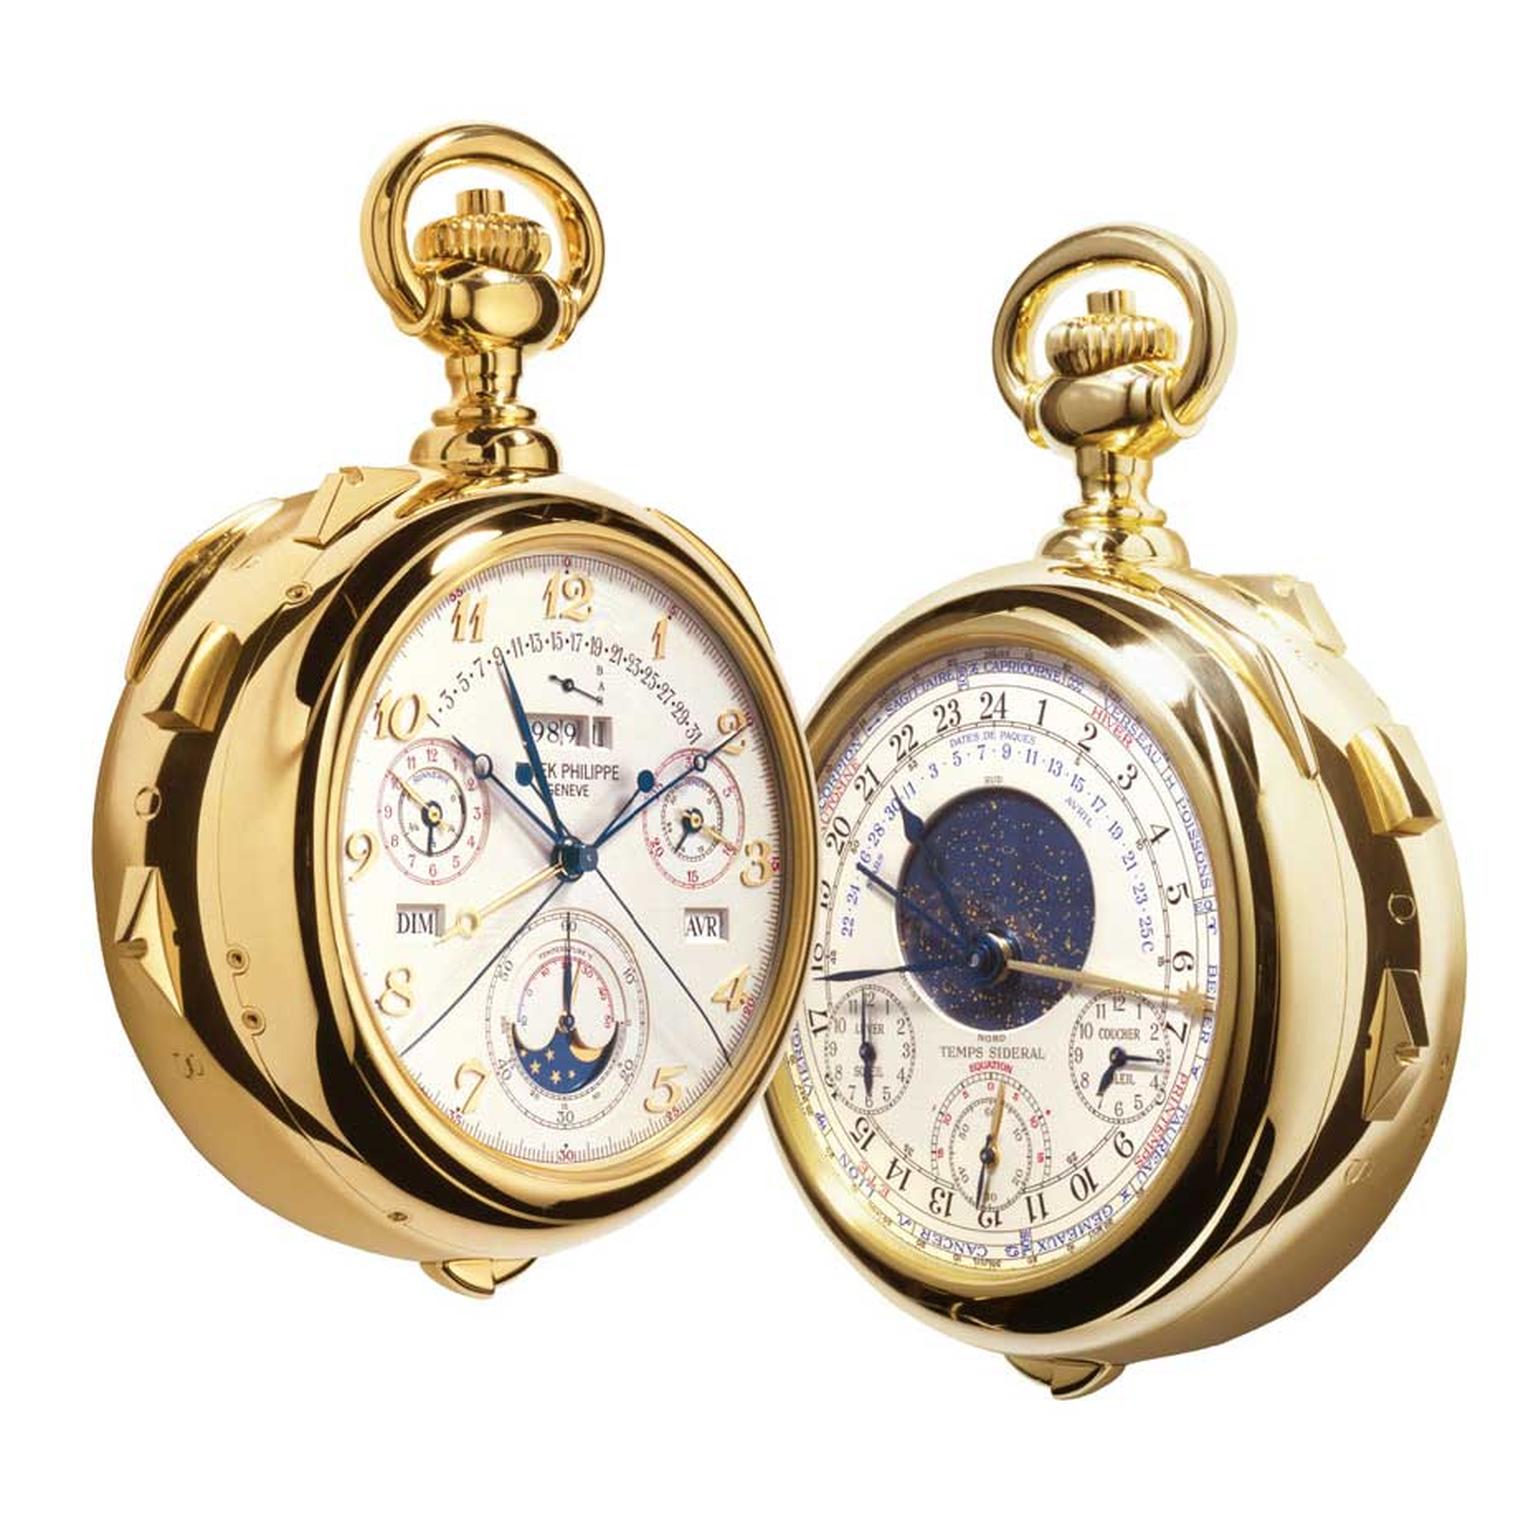 Calibre 89 by Patek Philippe was created to celebrate the brand's 150th anniversary in 1989. Packed with 33 complications, it is the world's most complicated pocket watch.